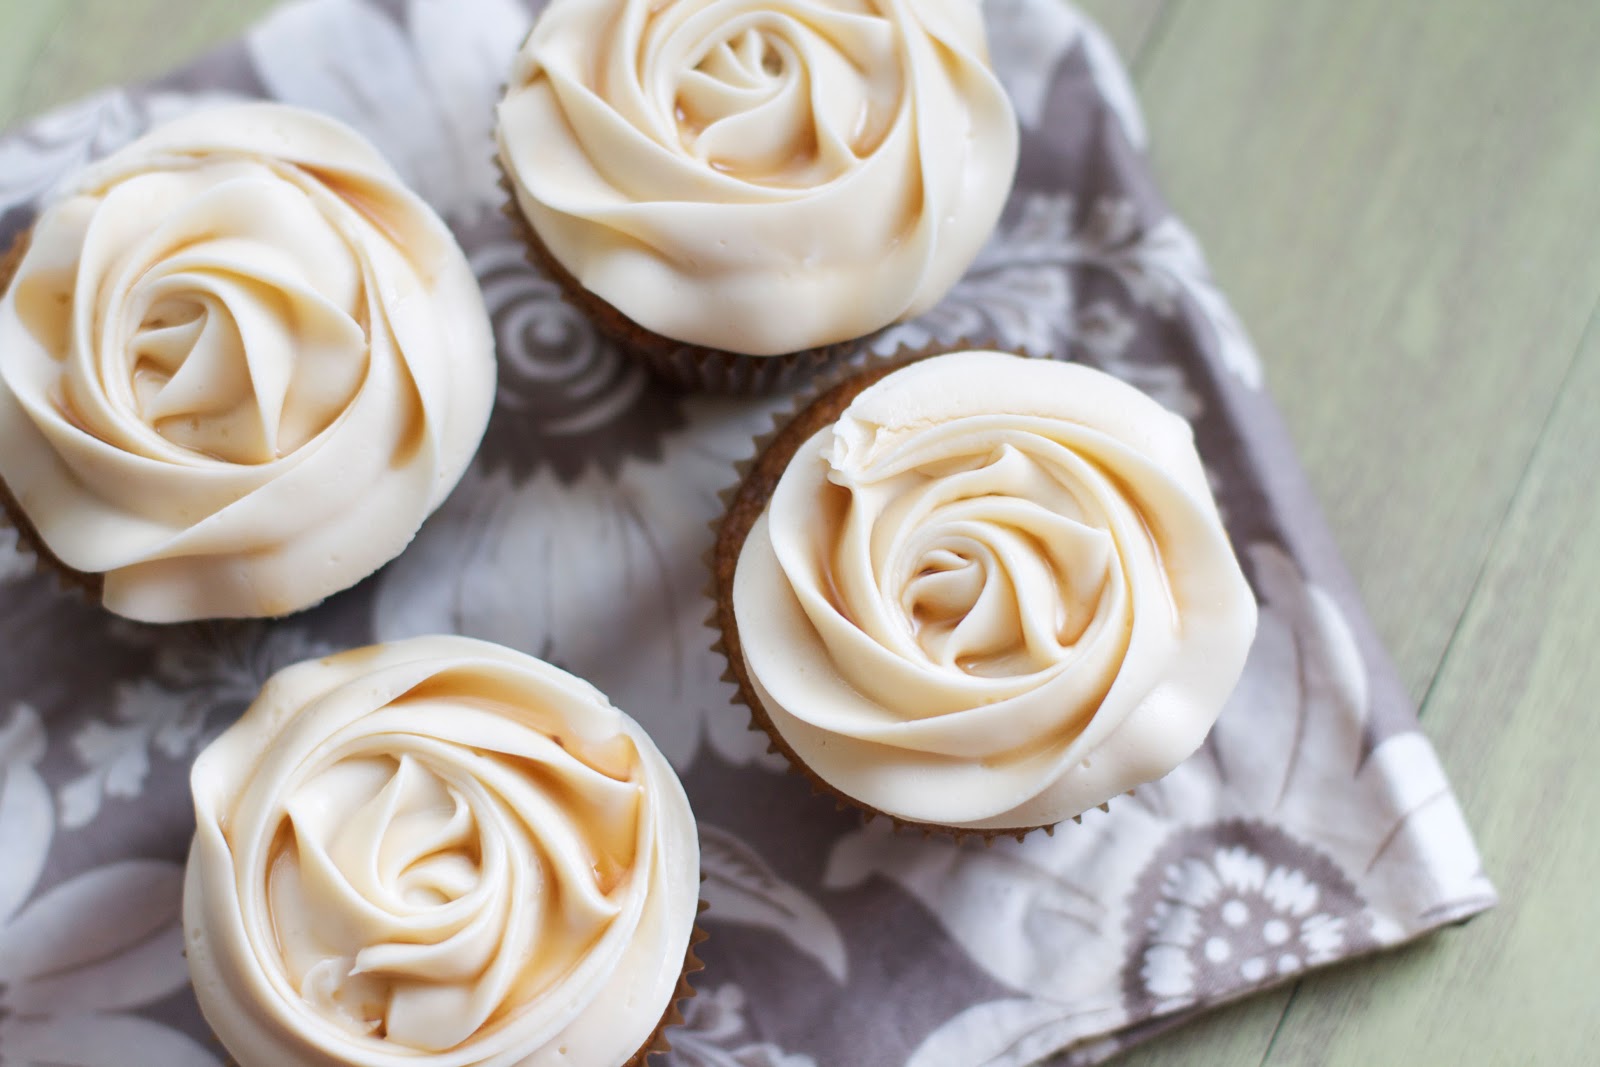 8 Photos of Cupcakes With Creme Cheese Frosting